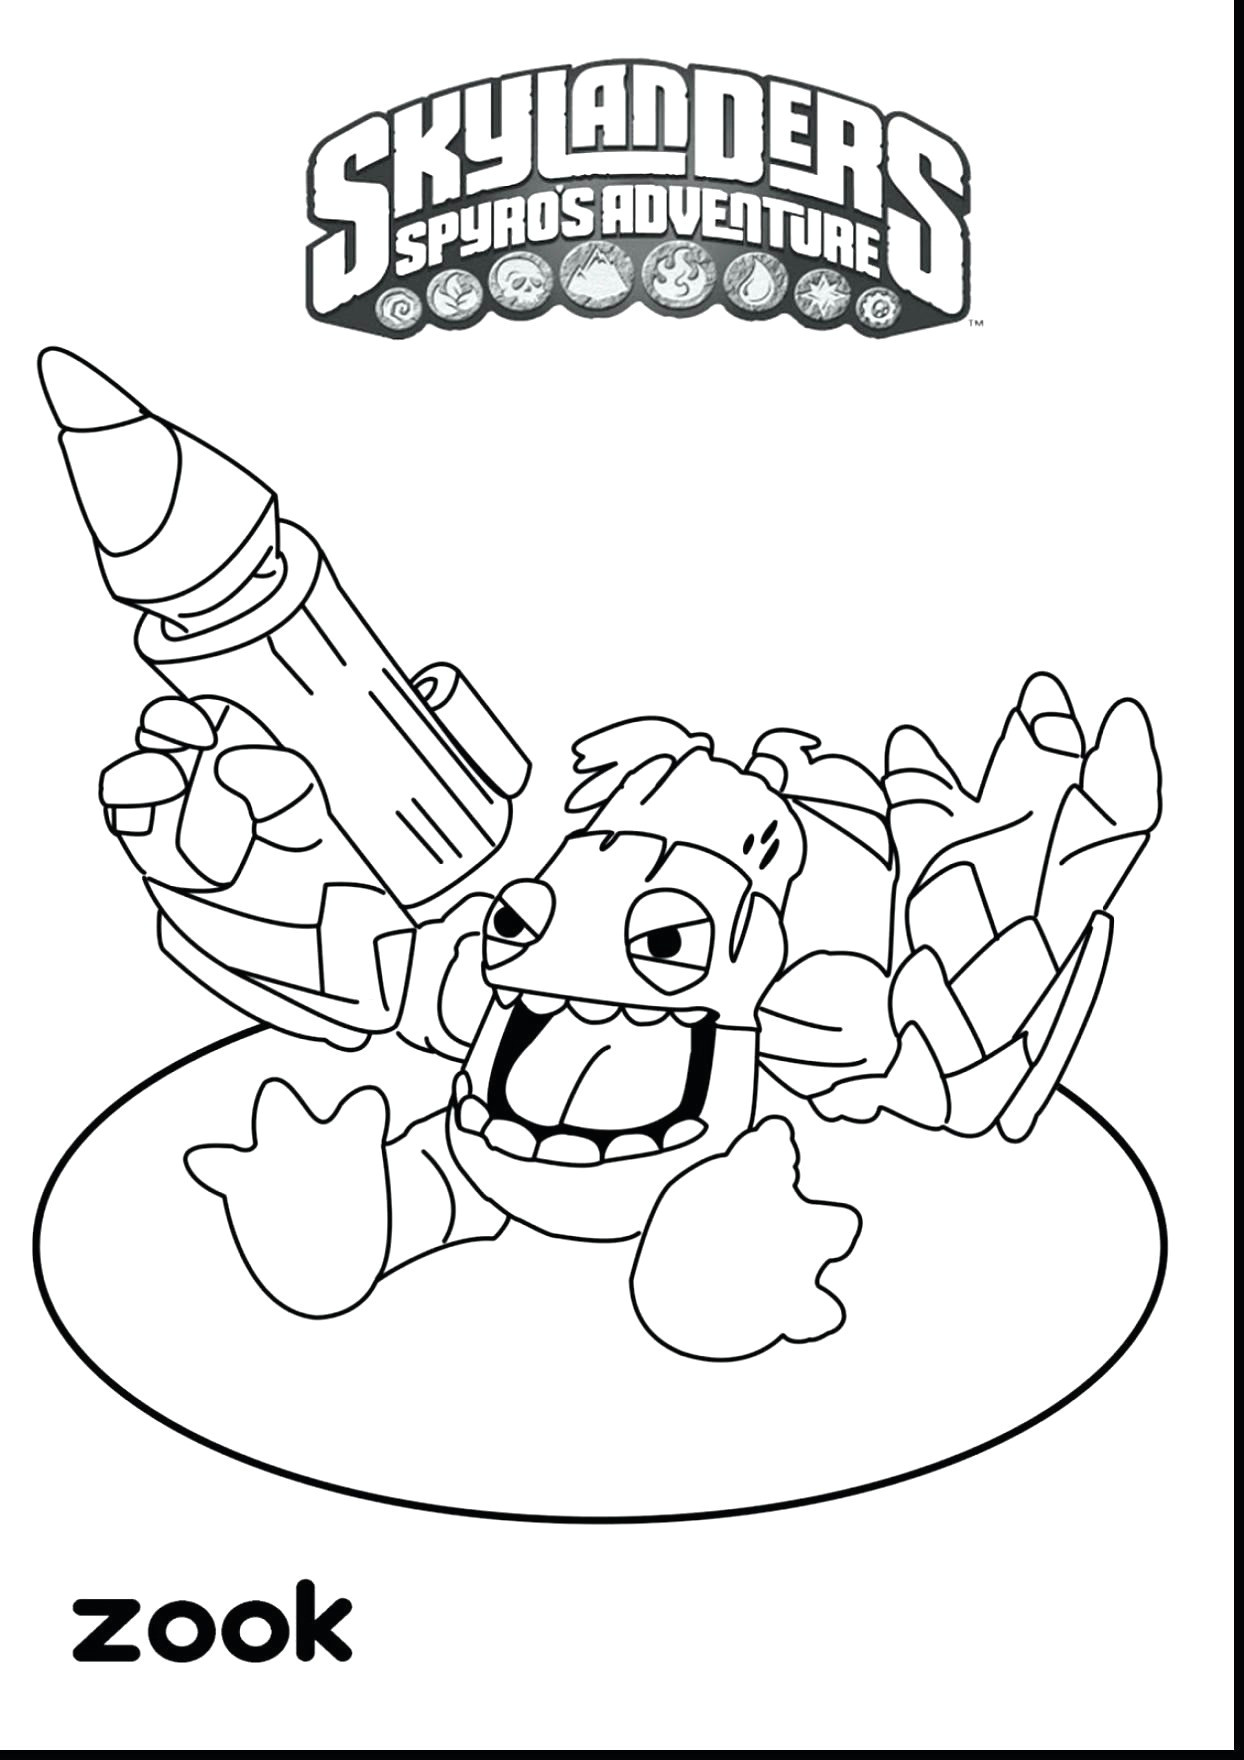 Easy Drawings with Markers Www Colouring Pages Brilliant Easy to Draw Instruments Home Coloring